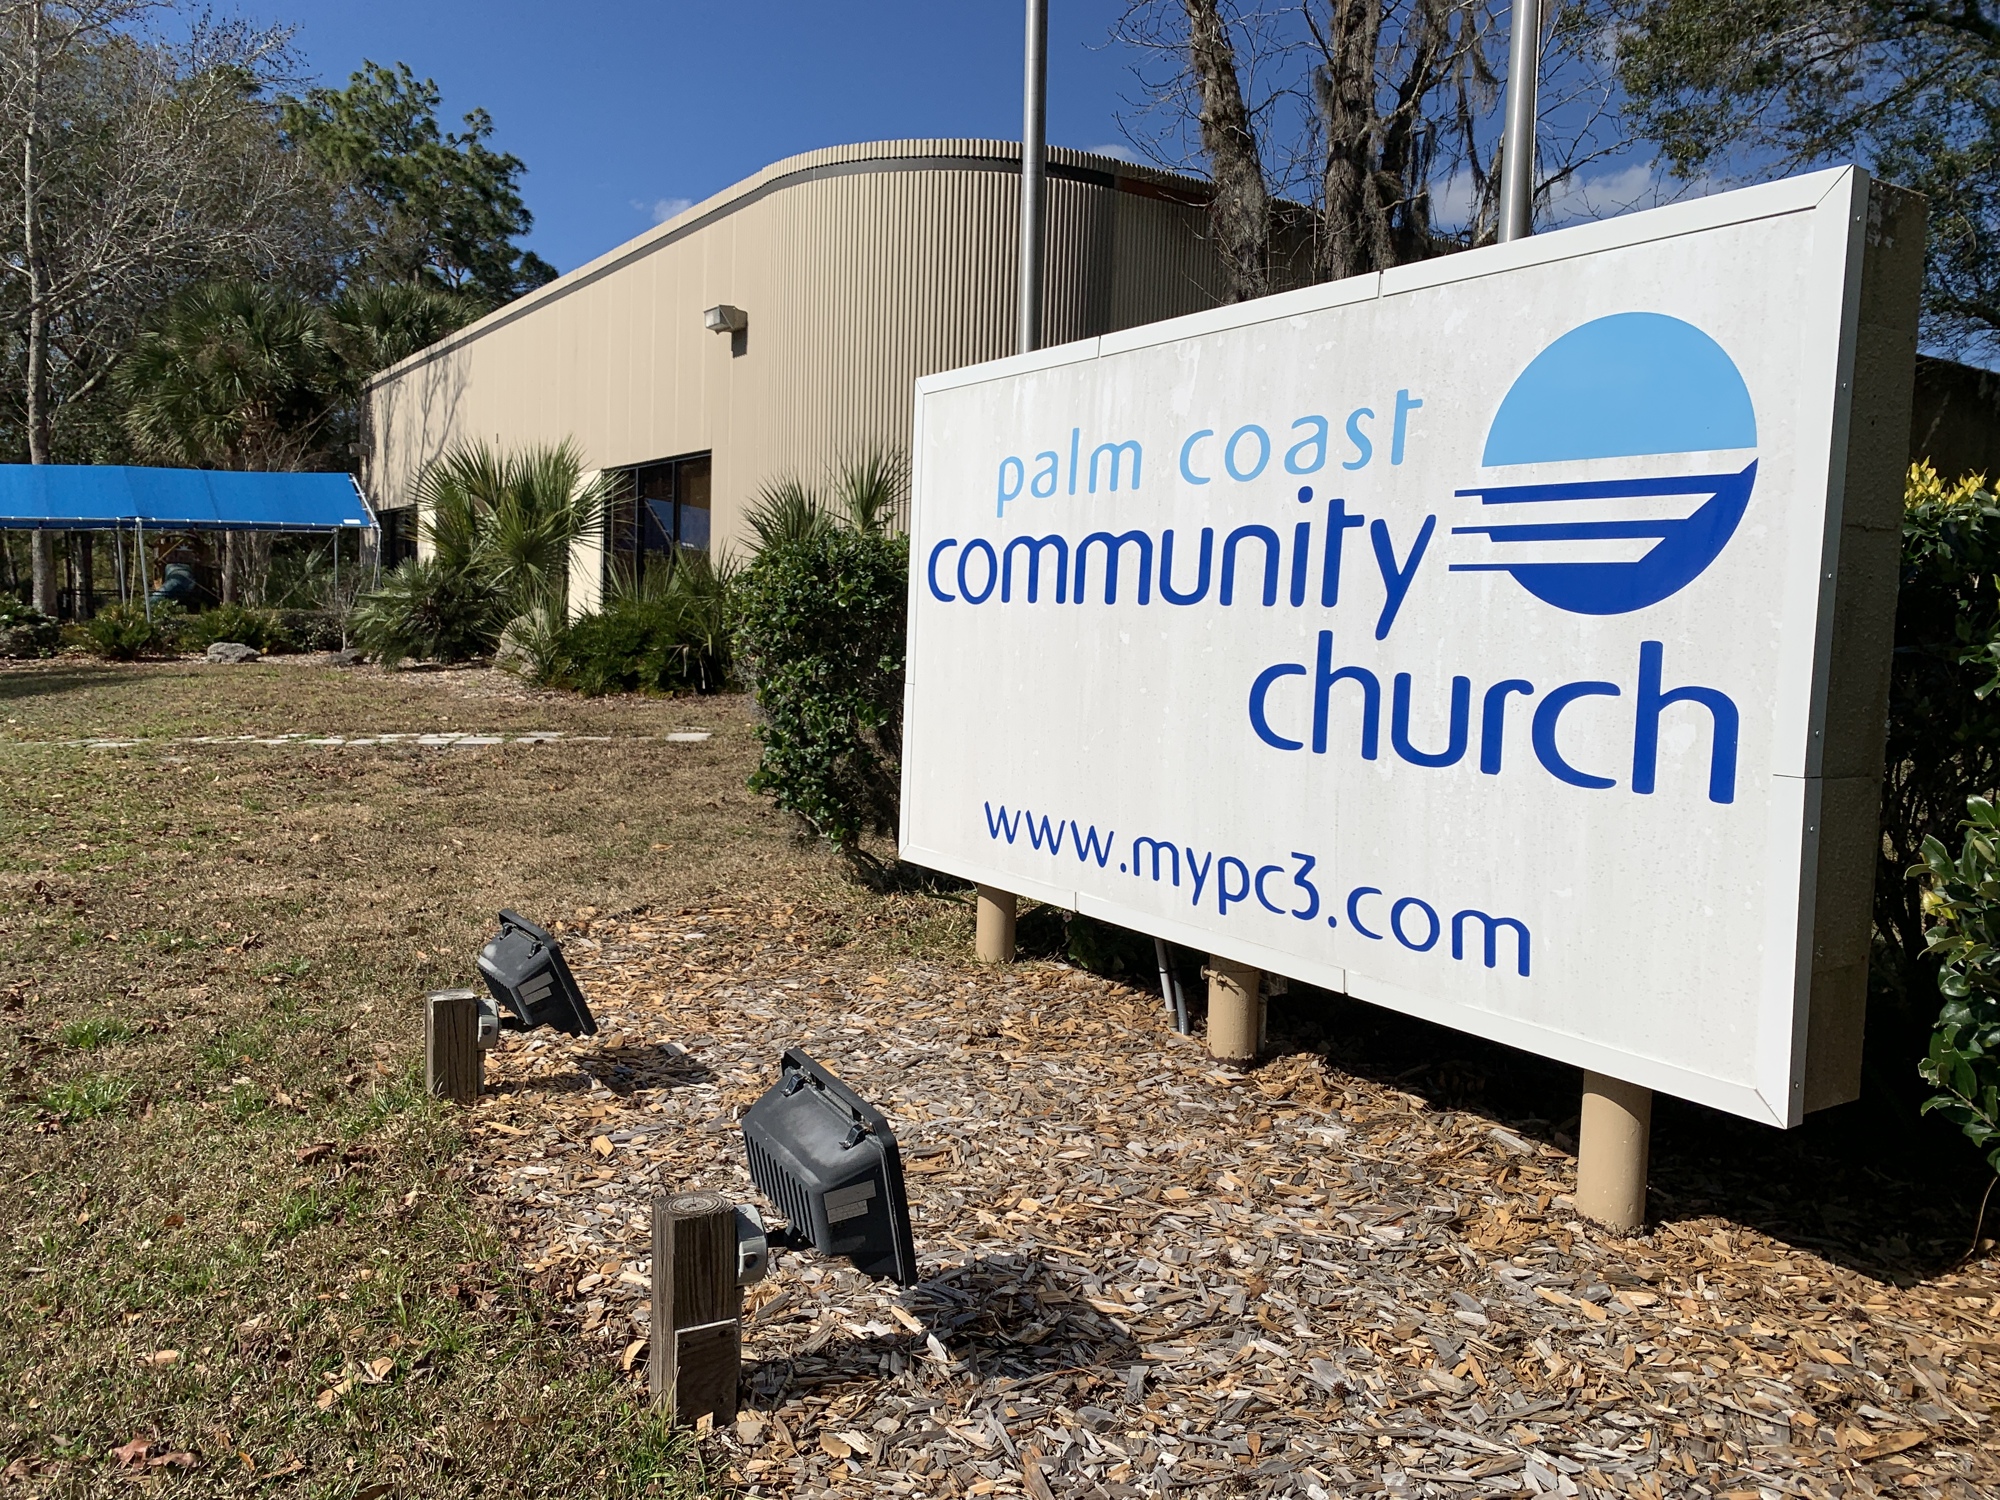 Pc3 is located at 1 Pine Lakes Parkway N.